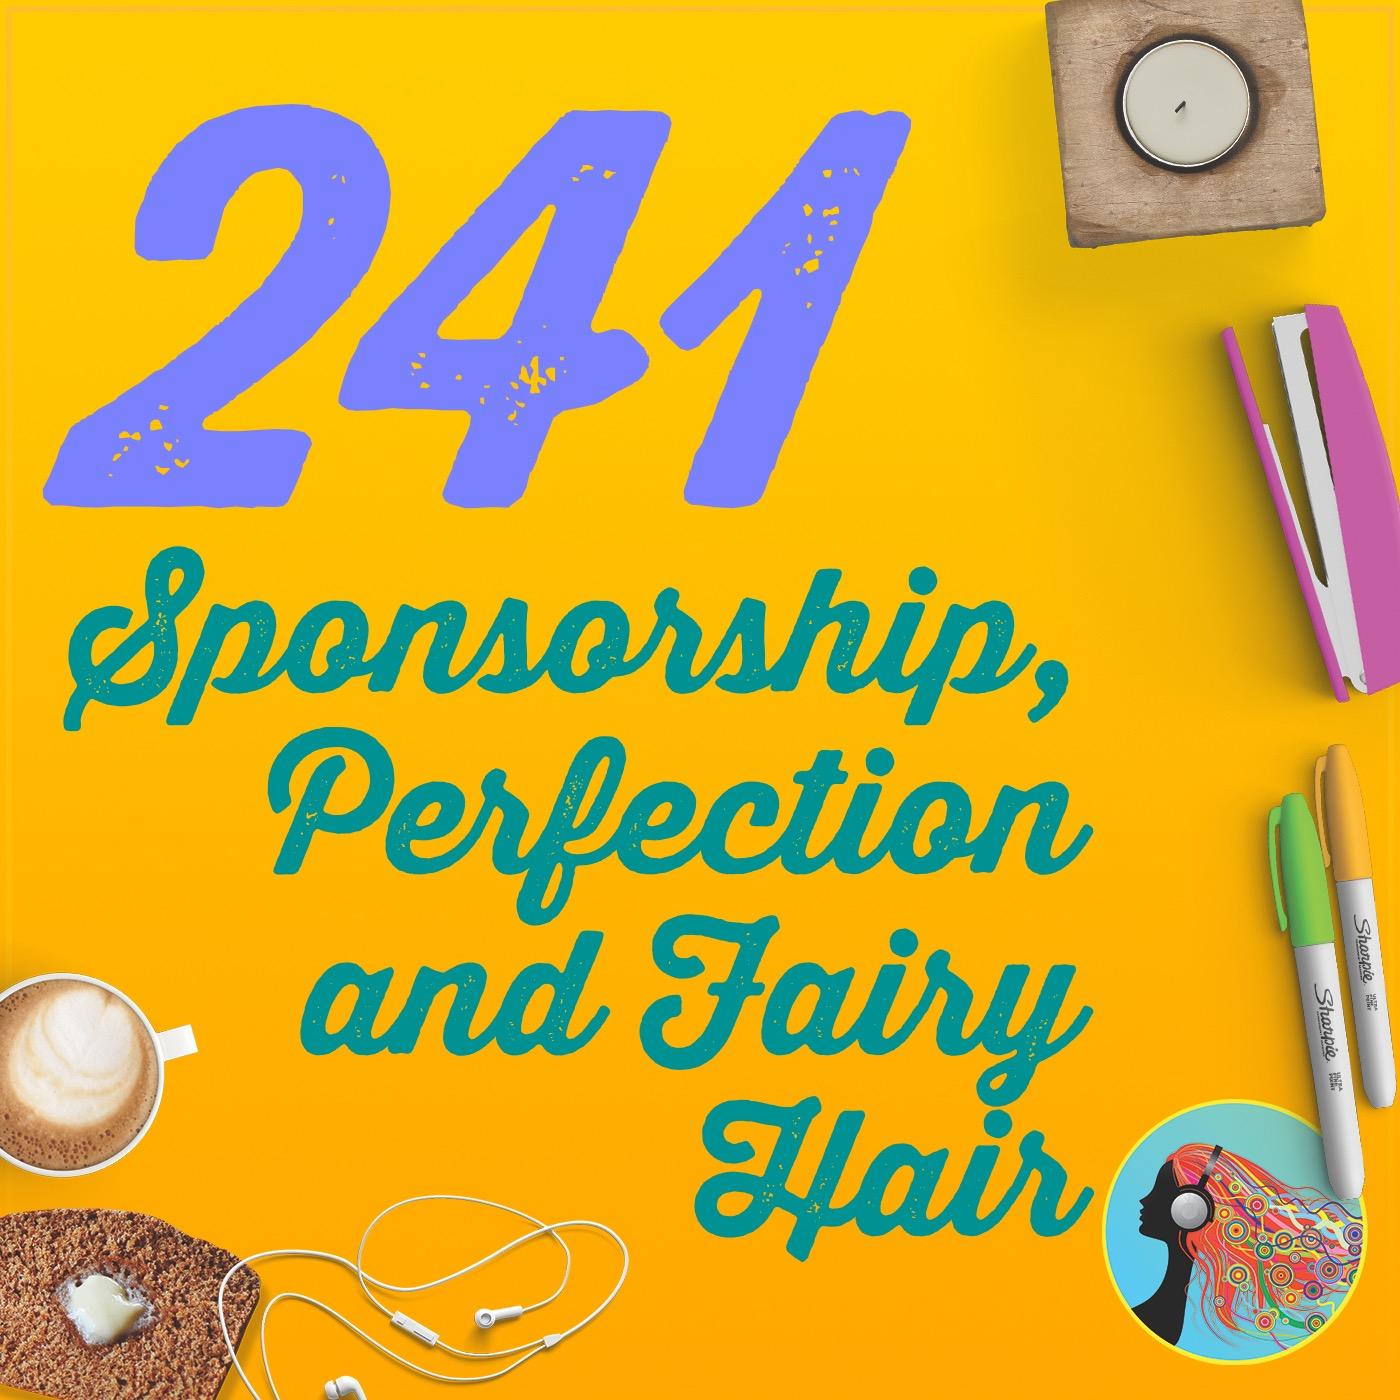 241 Sponsorship, Perfection and Fairy Hair